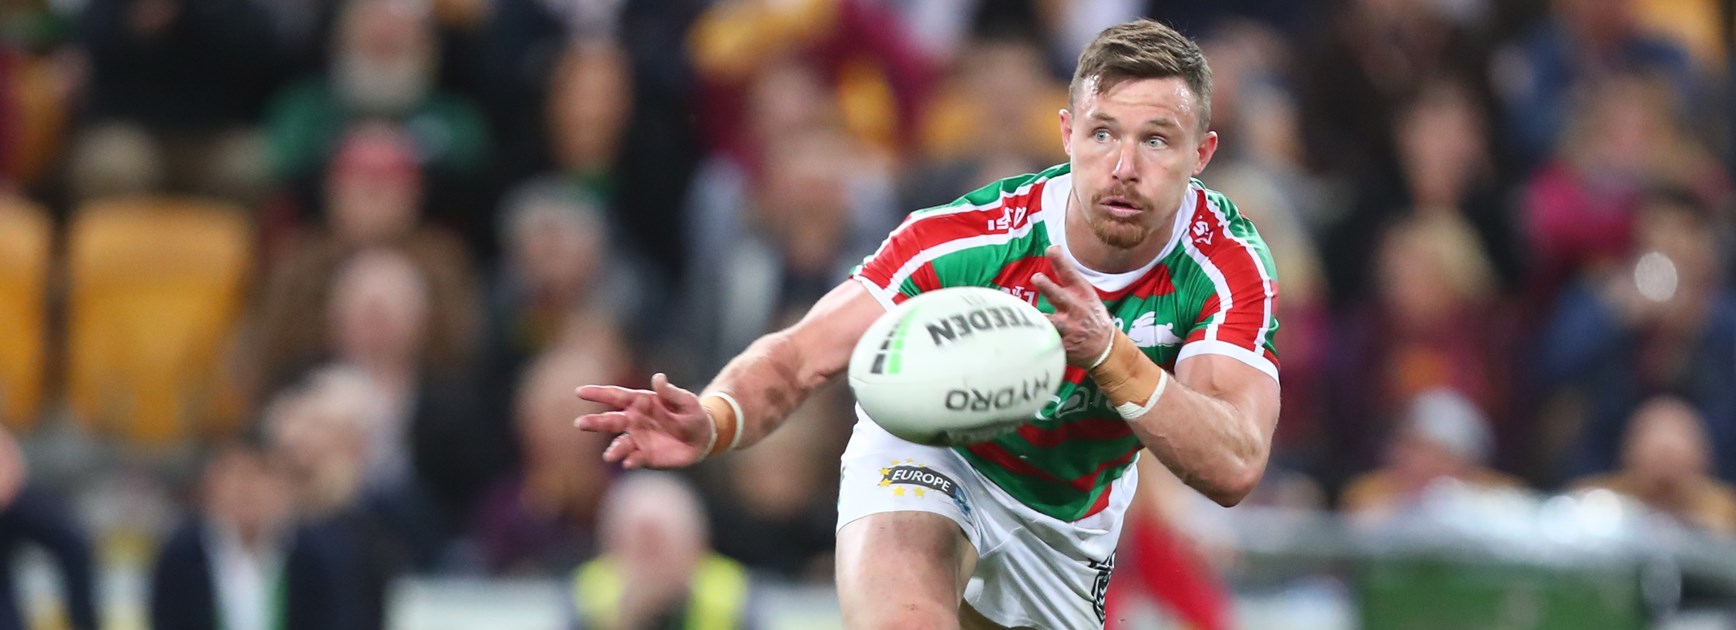 Cook and halves click after Rabbitohs were 'sick of losing'